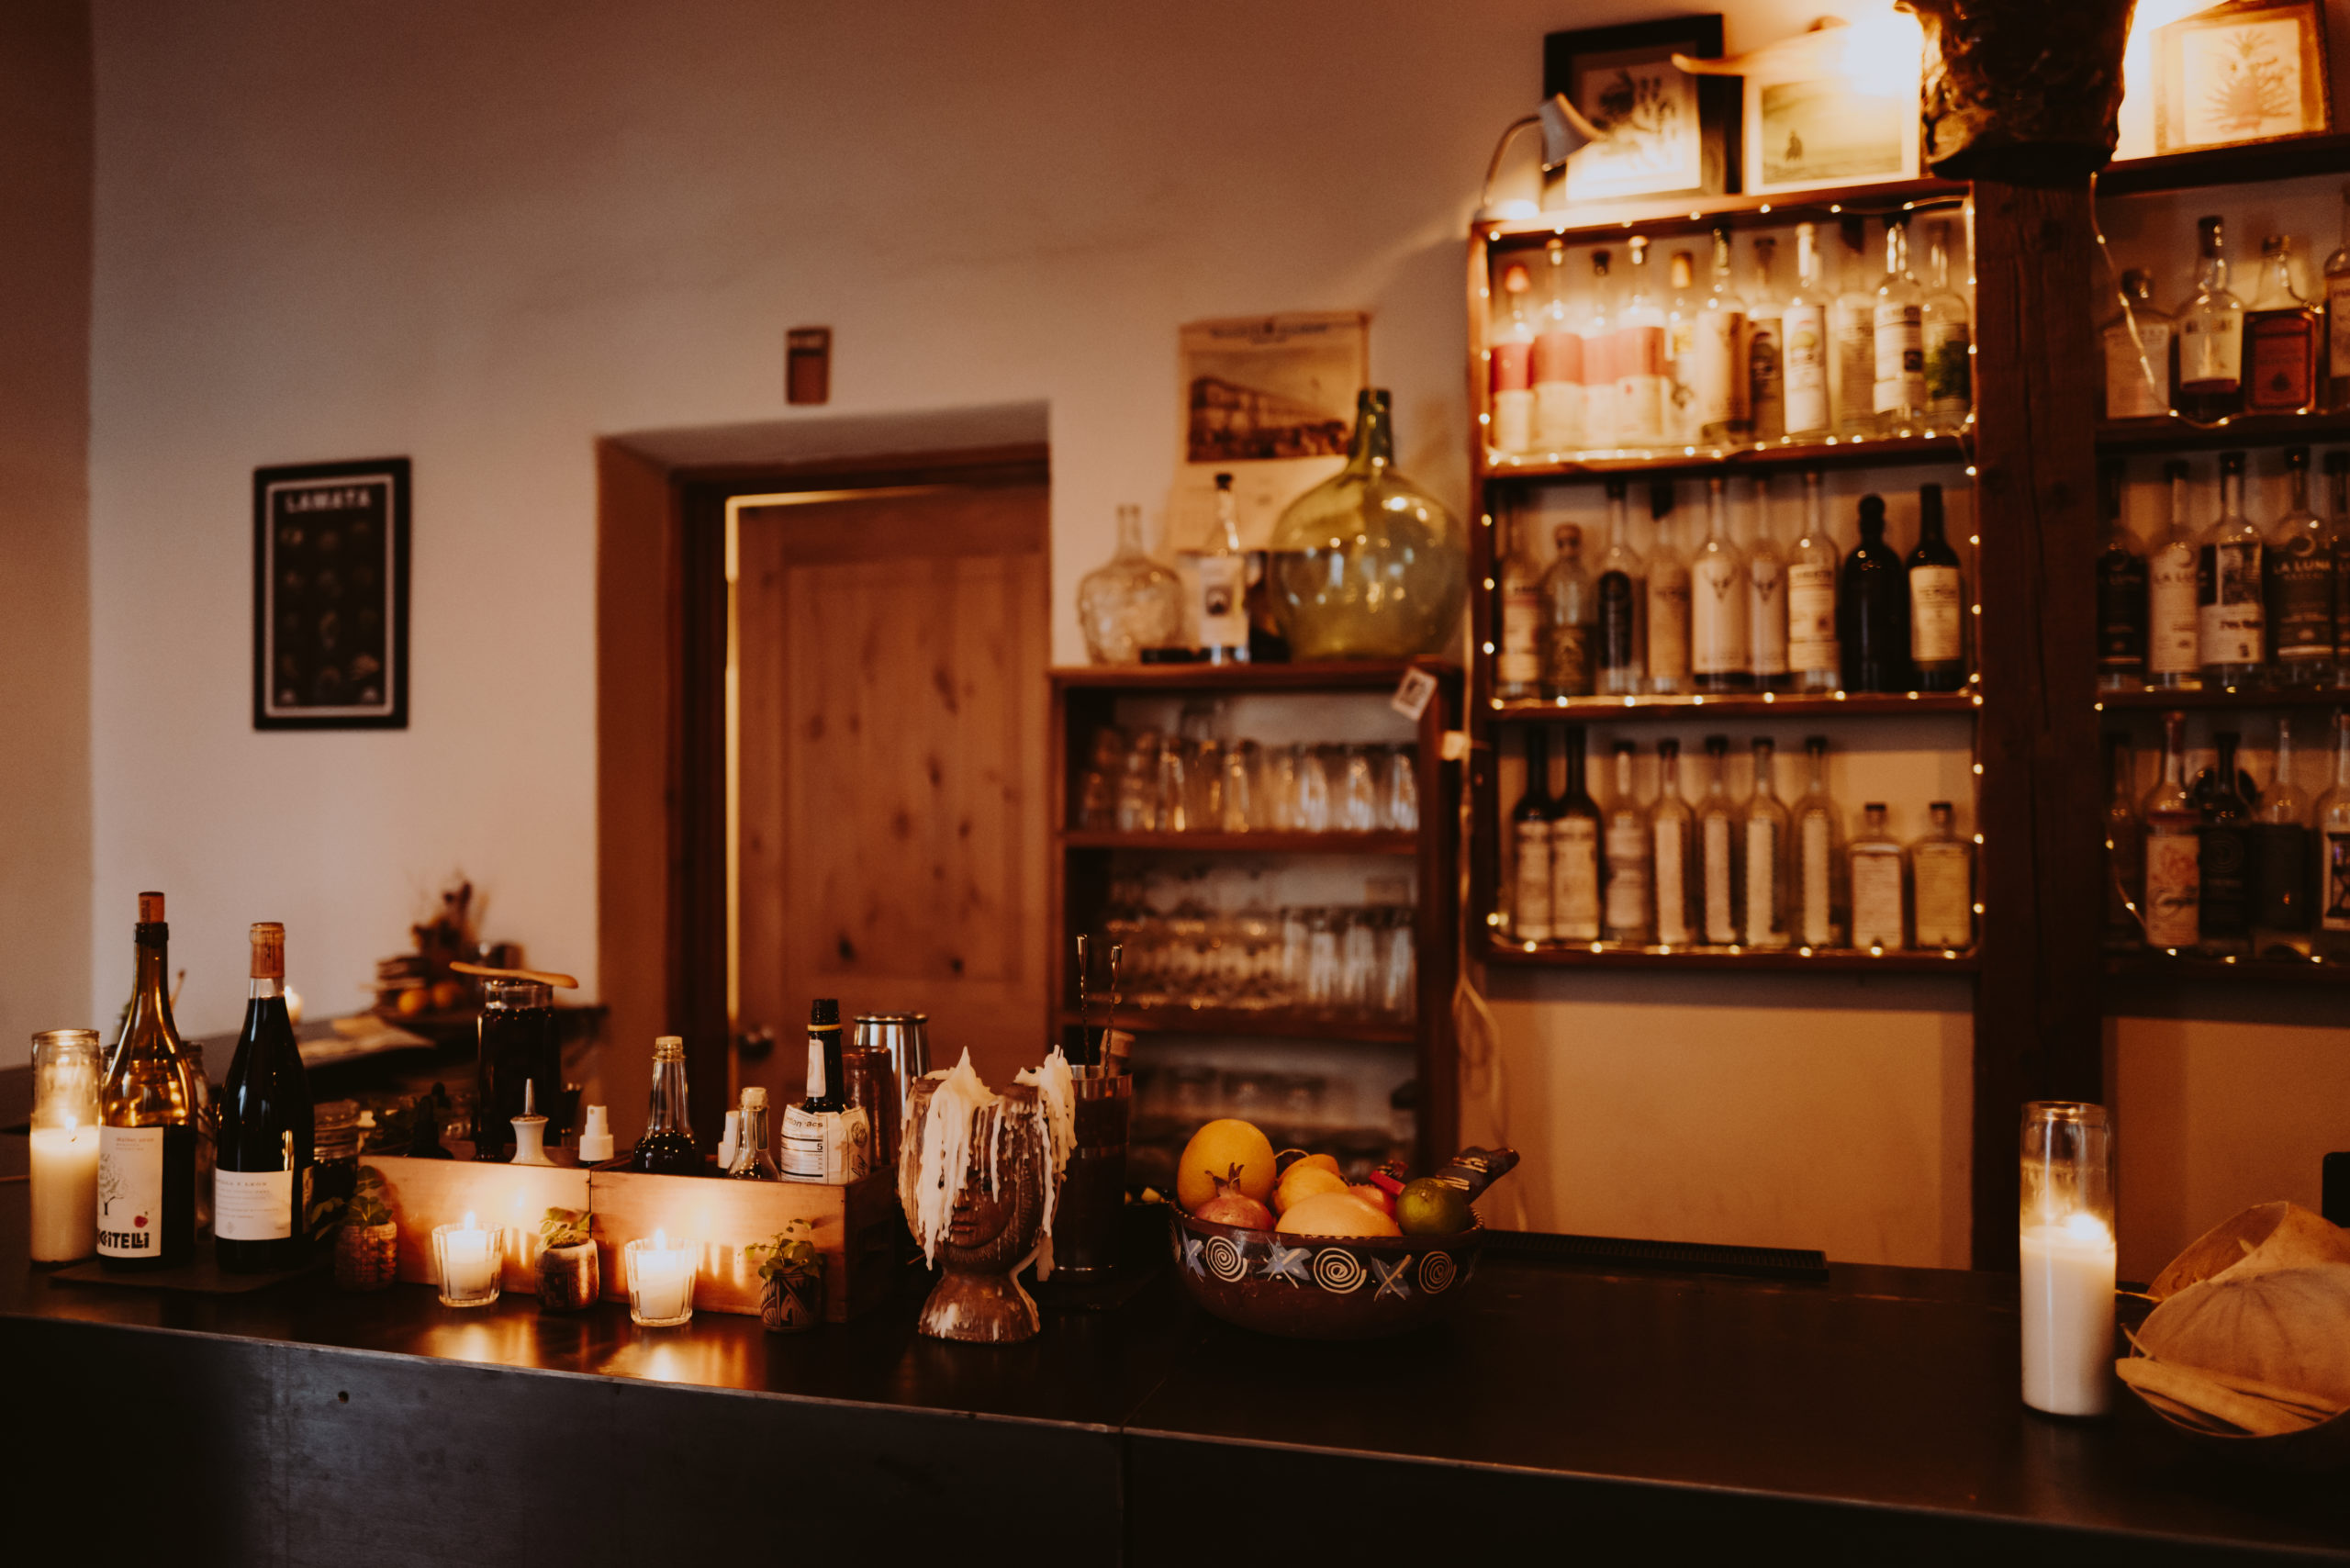 A photo of the interior of the Tucson mezcal bar known as El Crisol